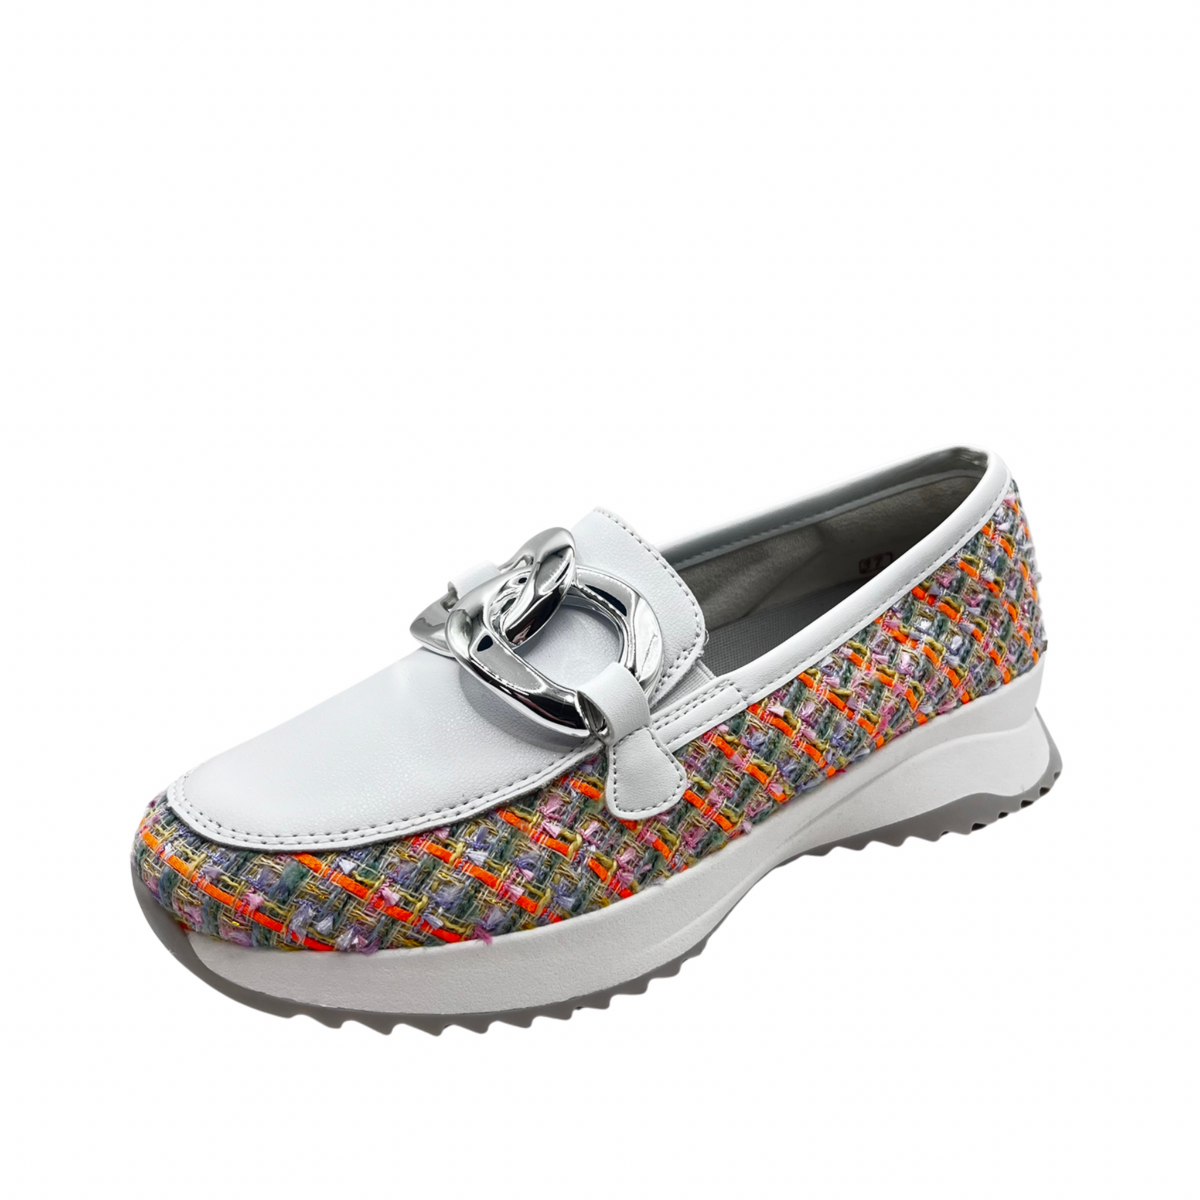 Rieker White and Multi Woven Design Loafers